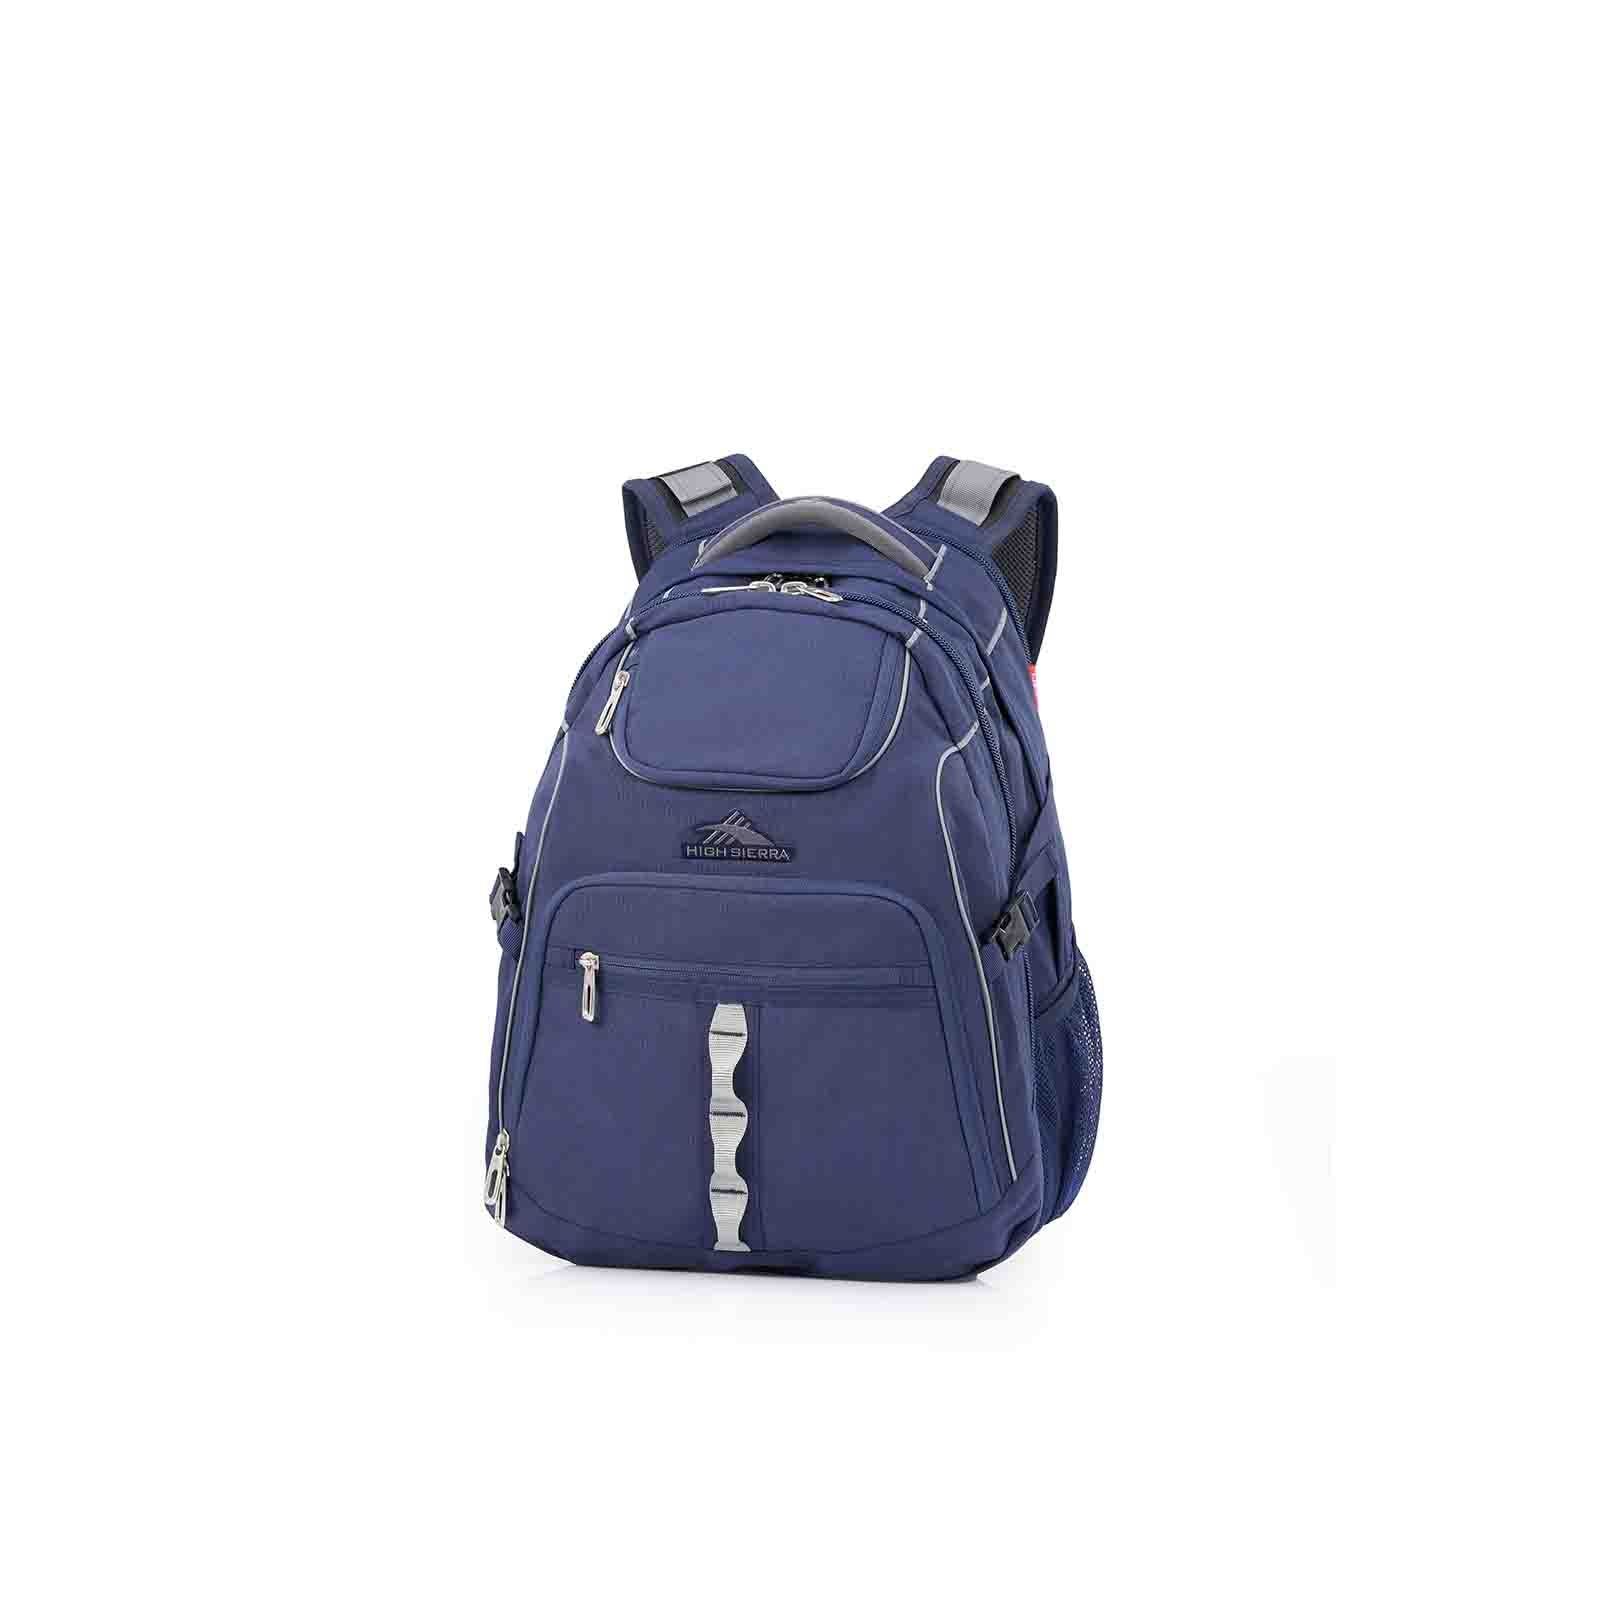 High-Sierra-Access-3-Eco-16-Inch-Laptop-Backpack-Marine-Blue-Front-Angle